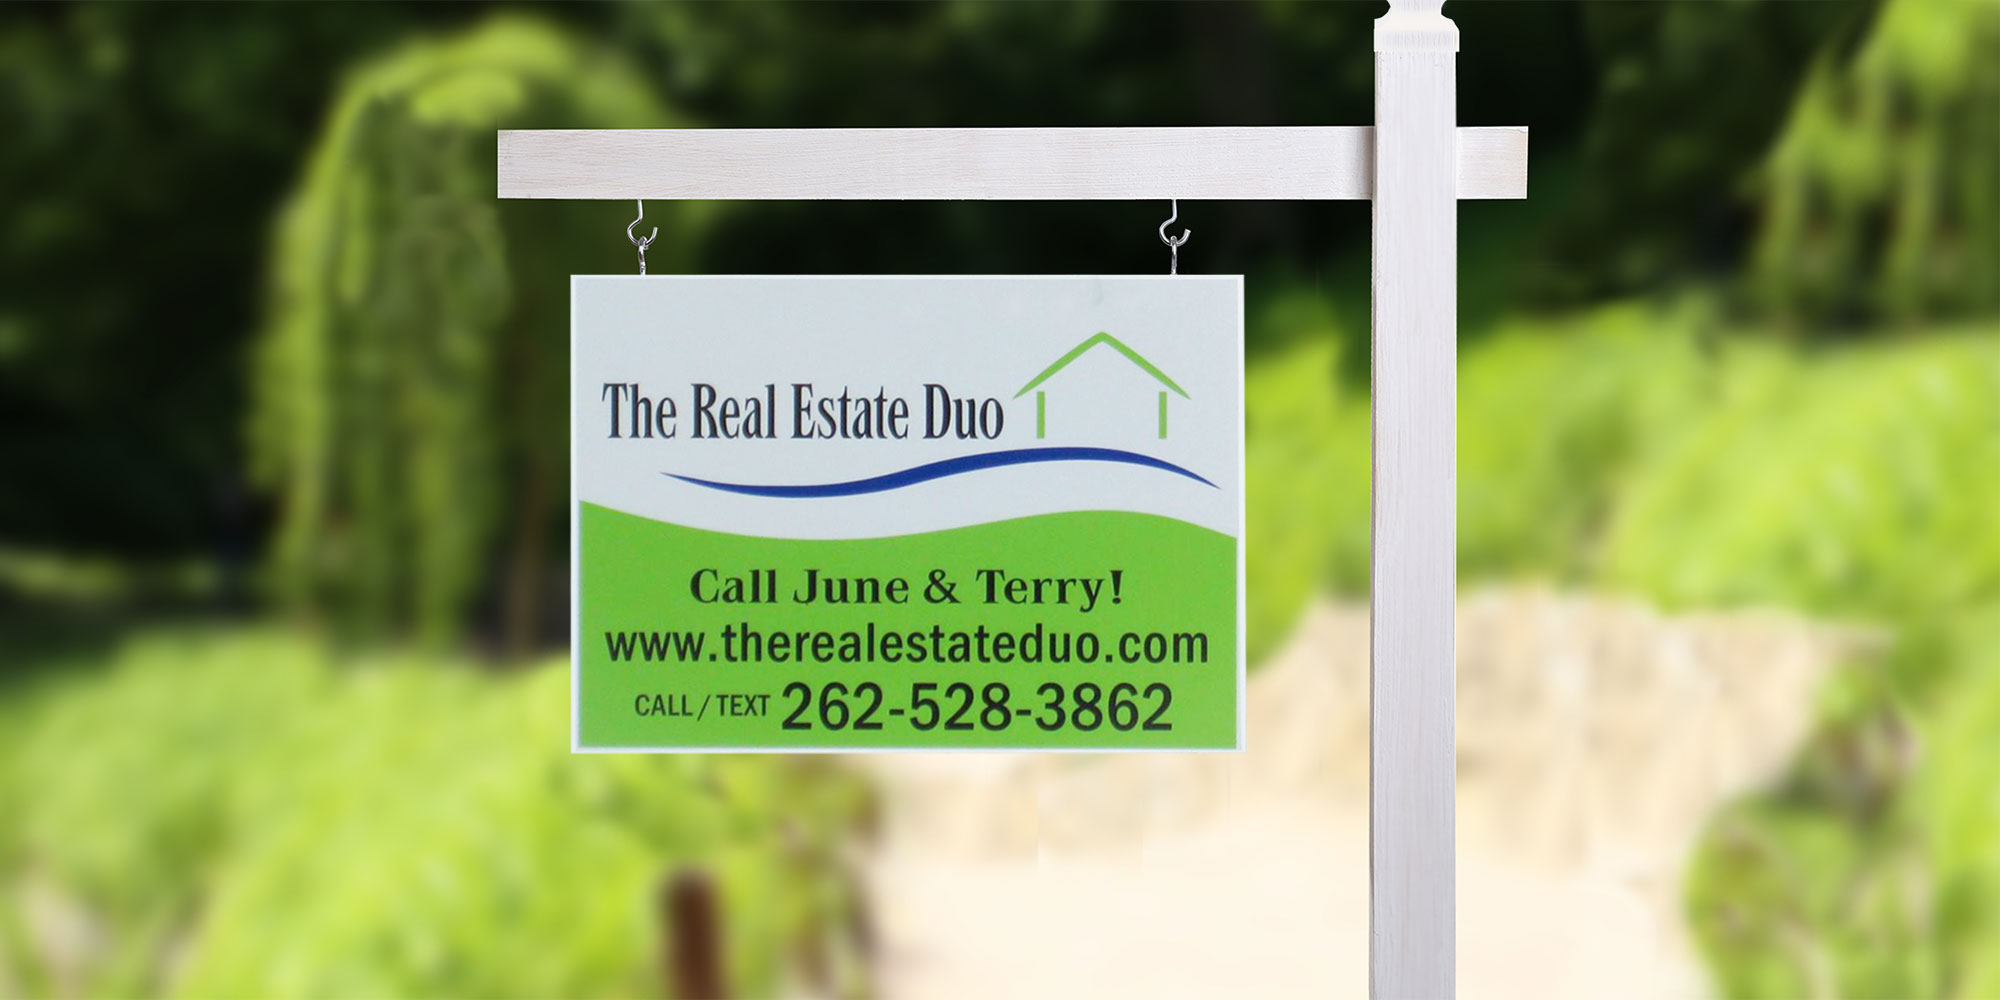 The Real Estate Duo